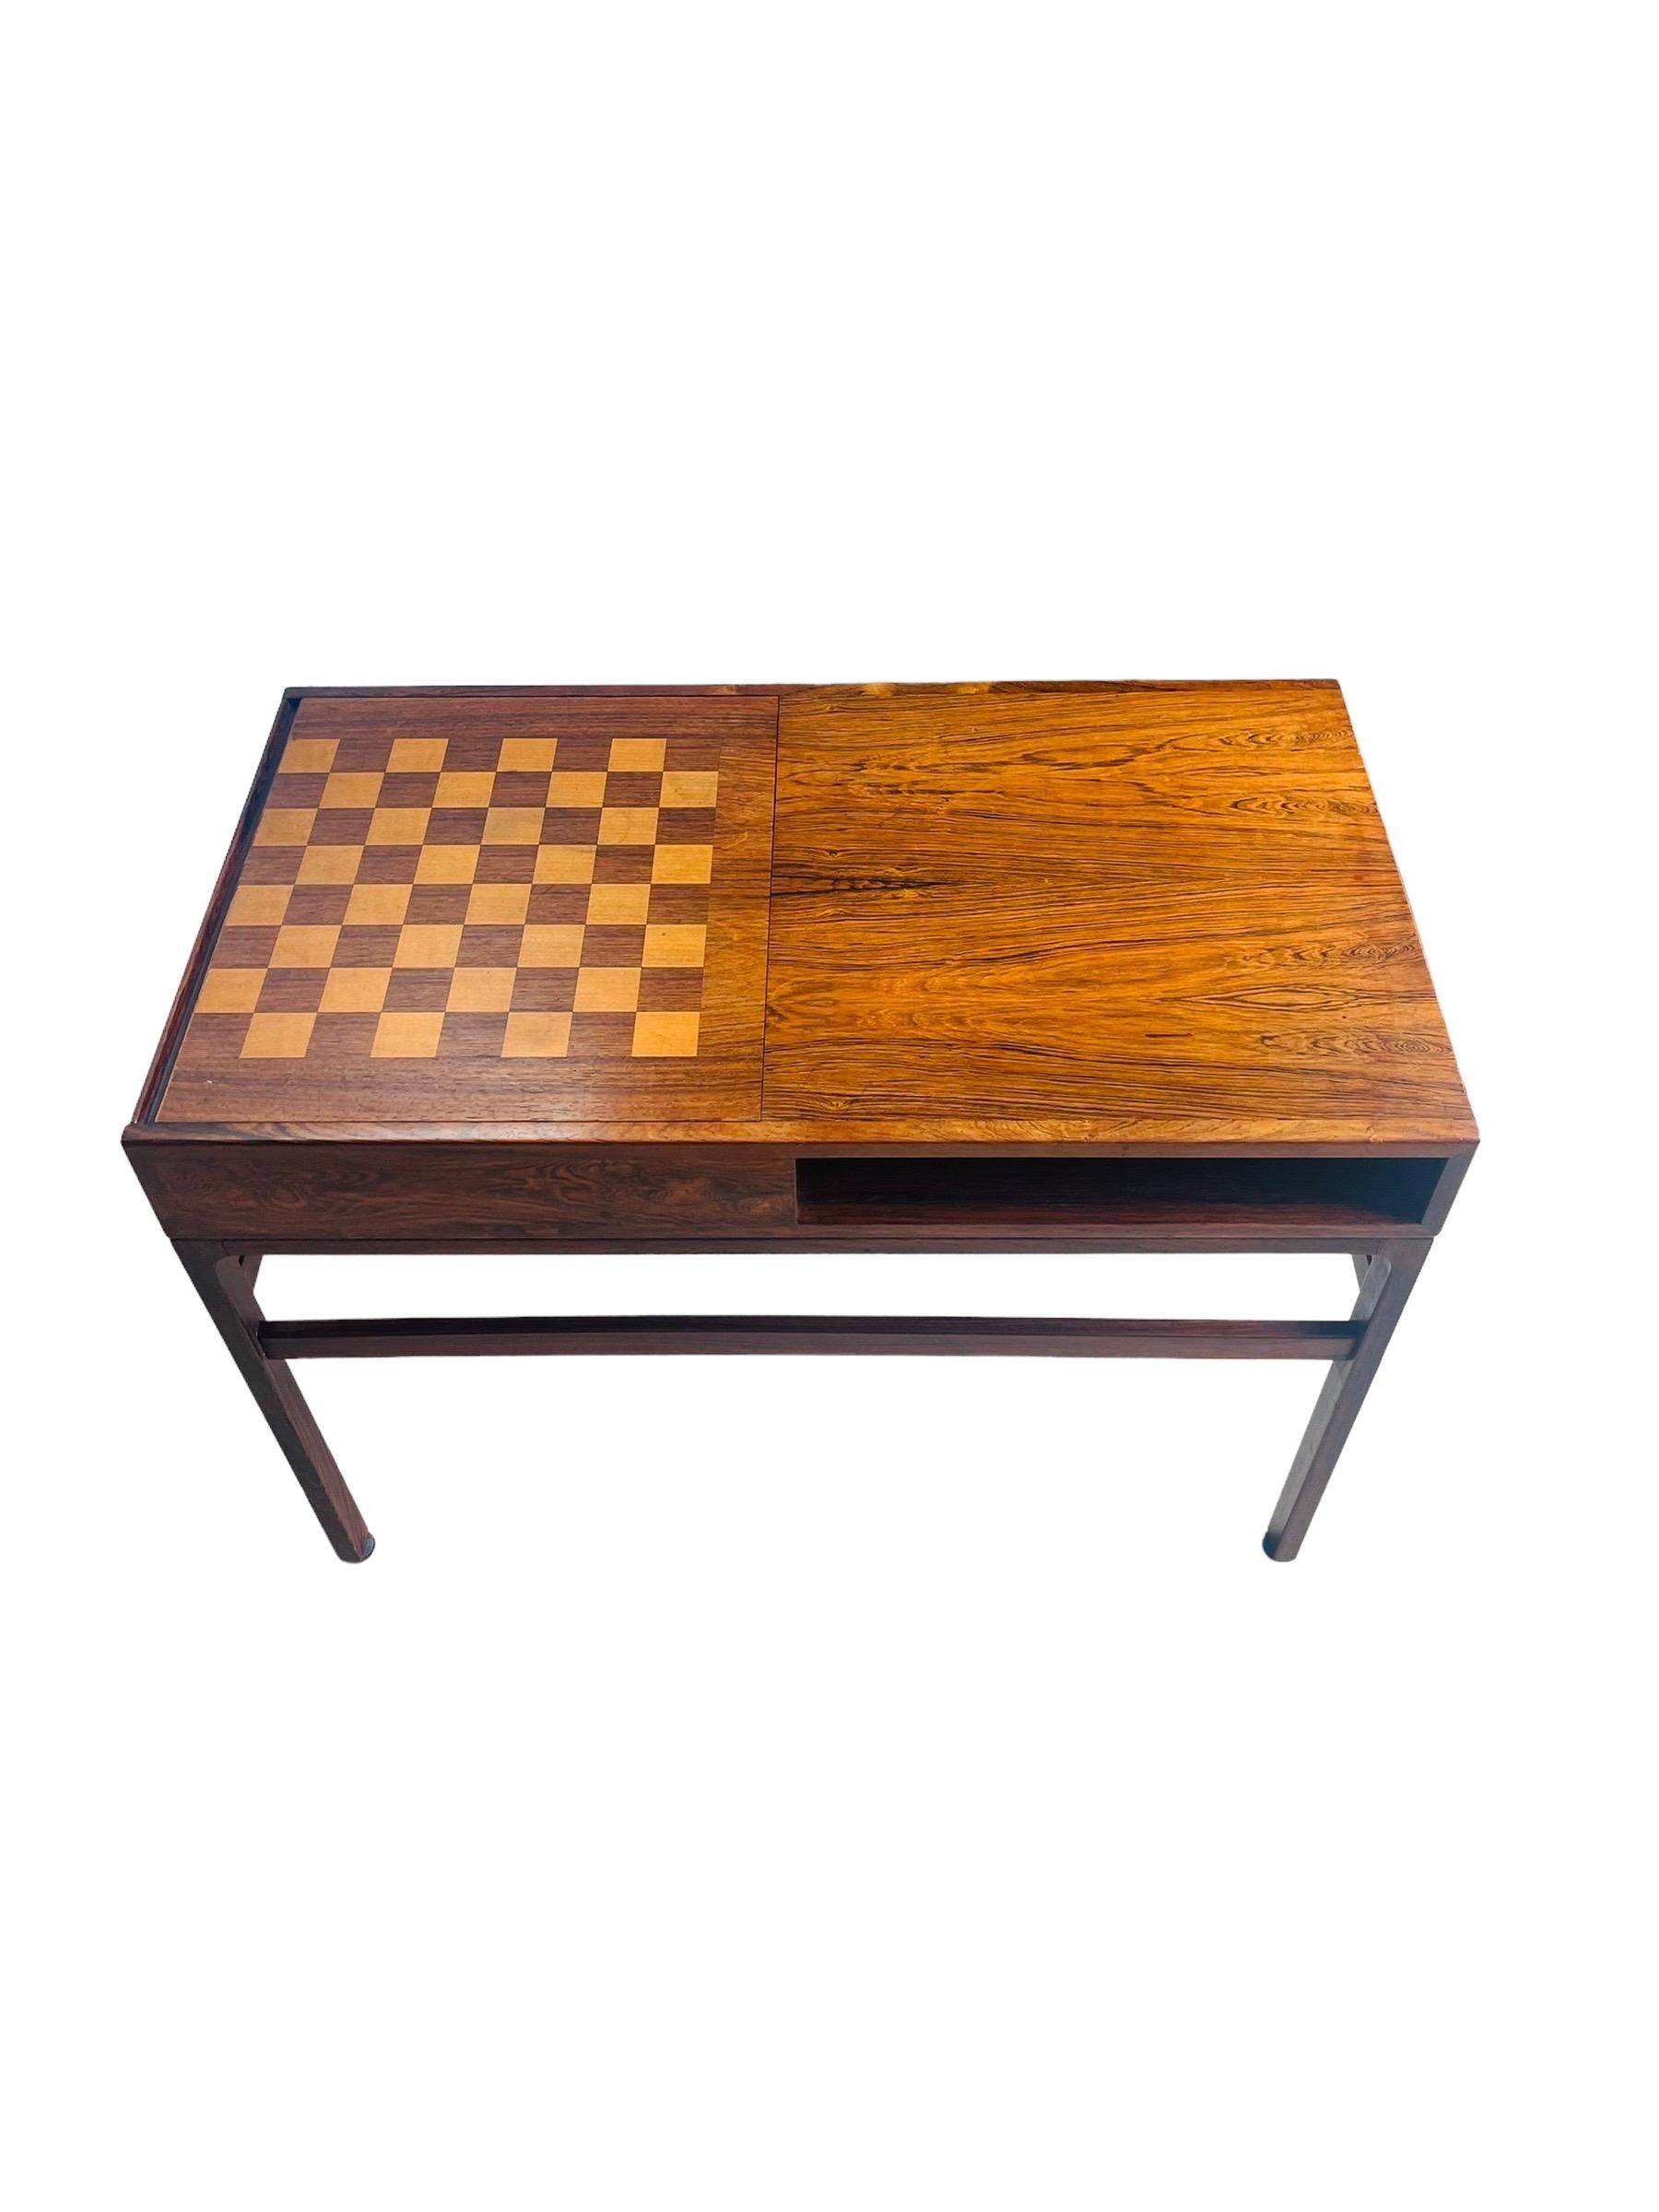 Stunning Danish Modern Rosewood Game table with reversible Chess/Checkers Board designed by Illum Wikkelsø. This beautiful table has space for magazines and storage space under the sliding game board. The table is in good vintage condition with